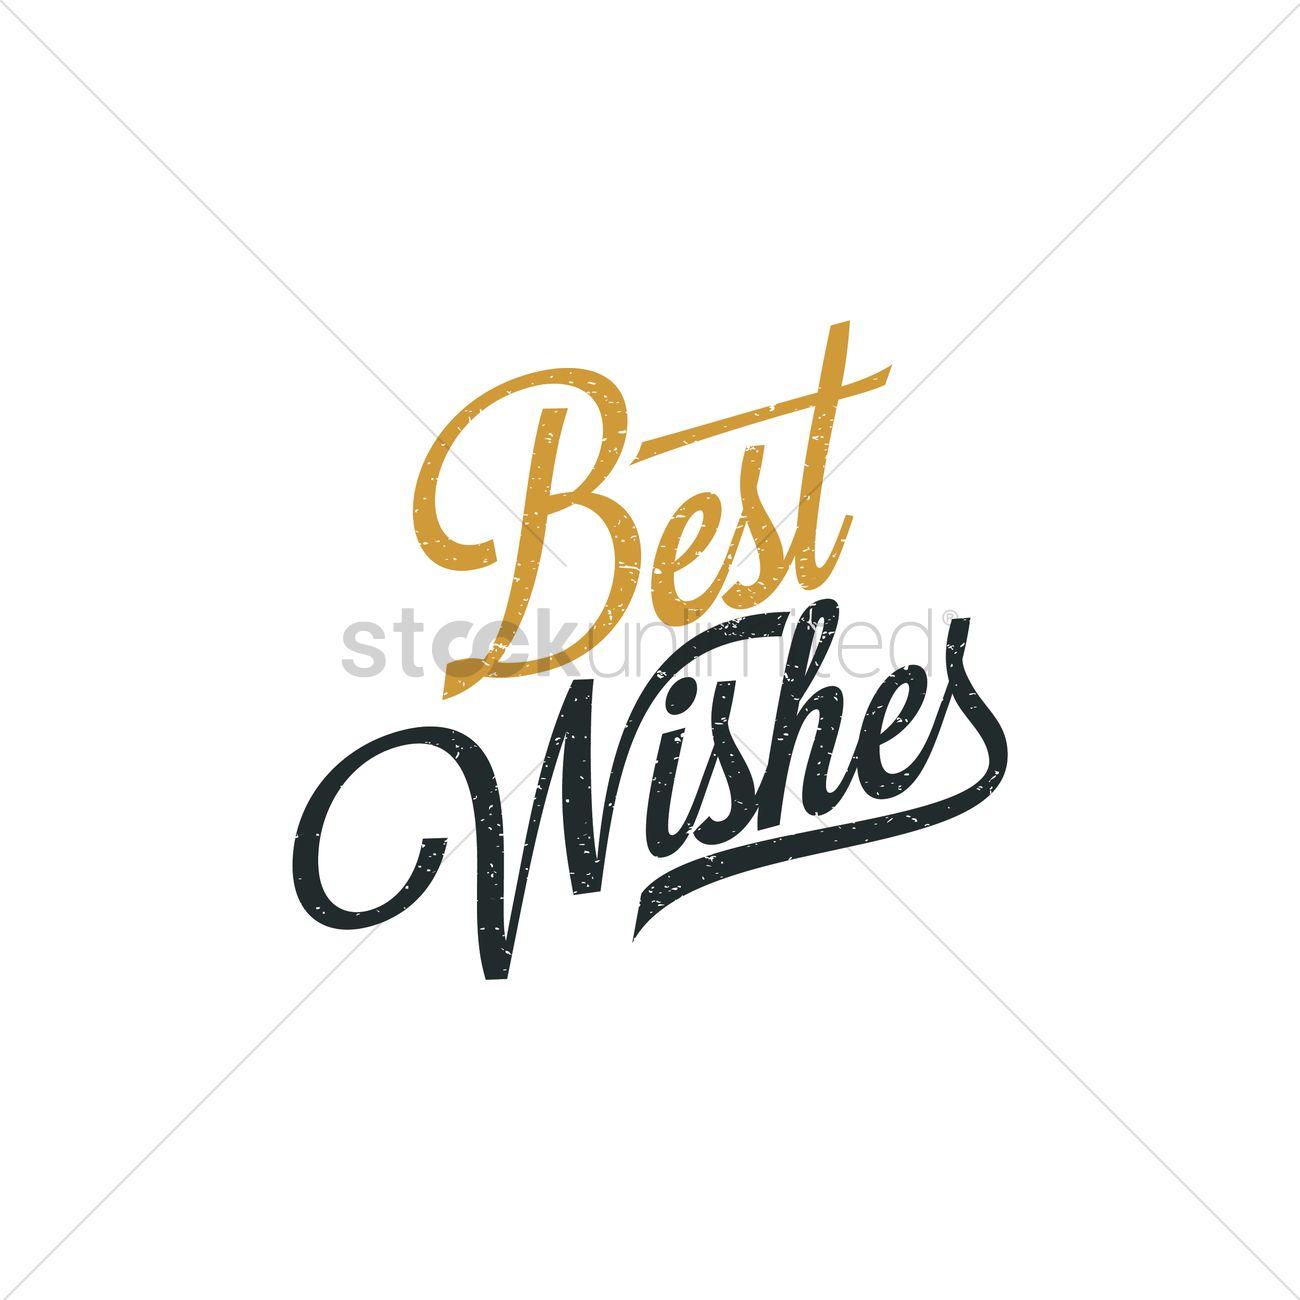 Best Wishes Logo - Best wishes hand lettering Vector Image